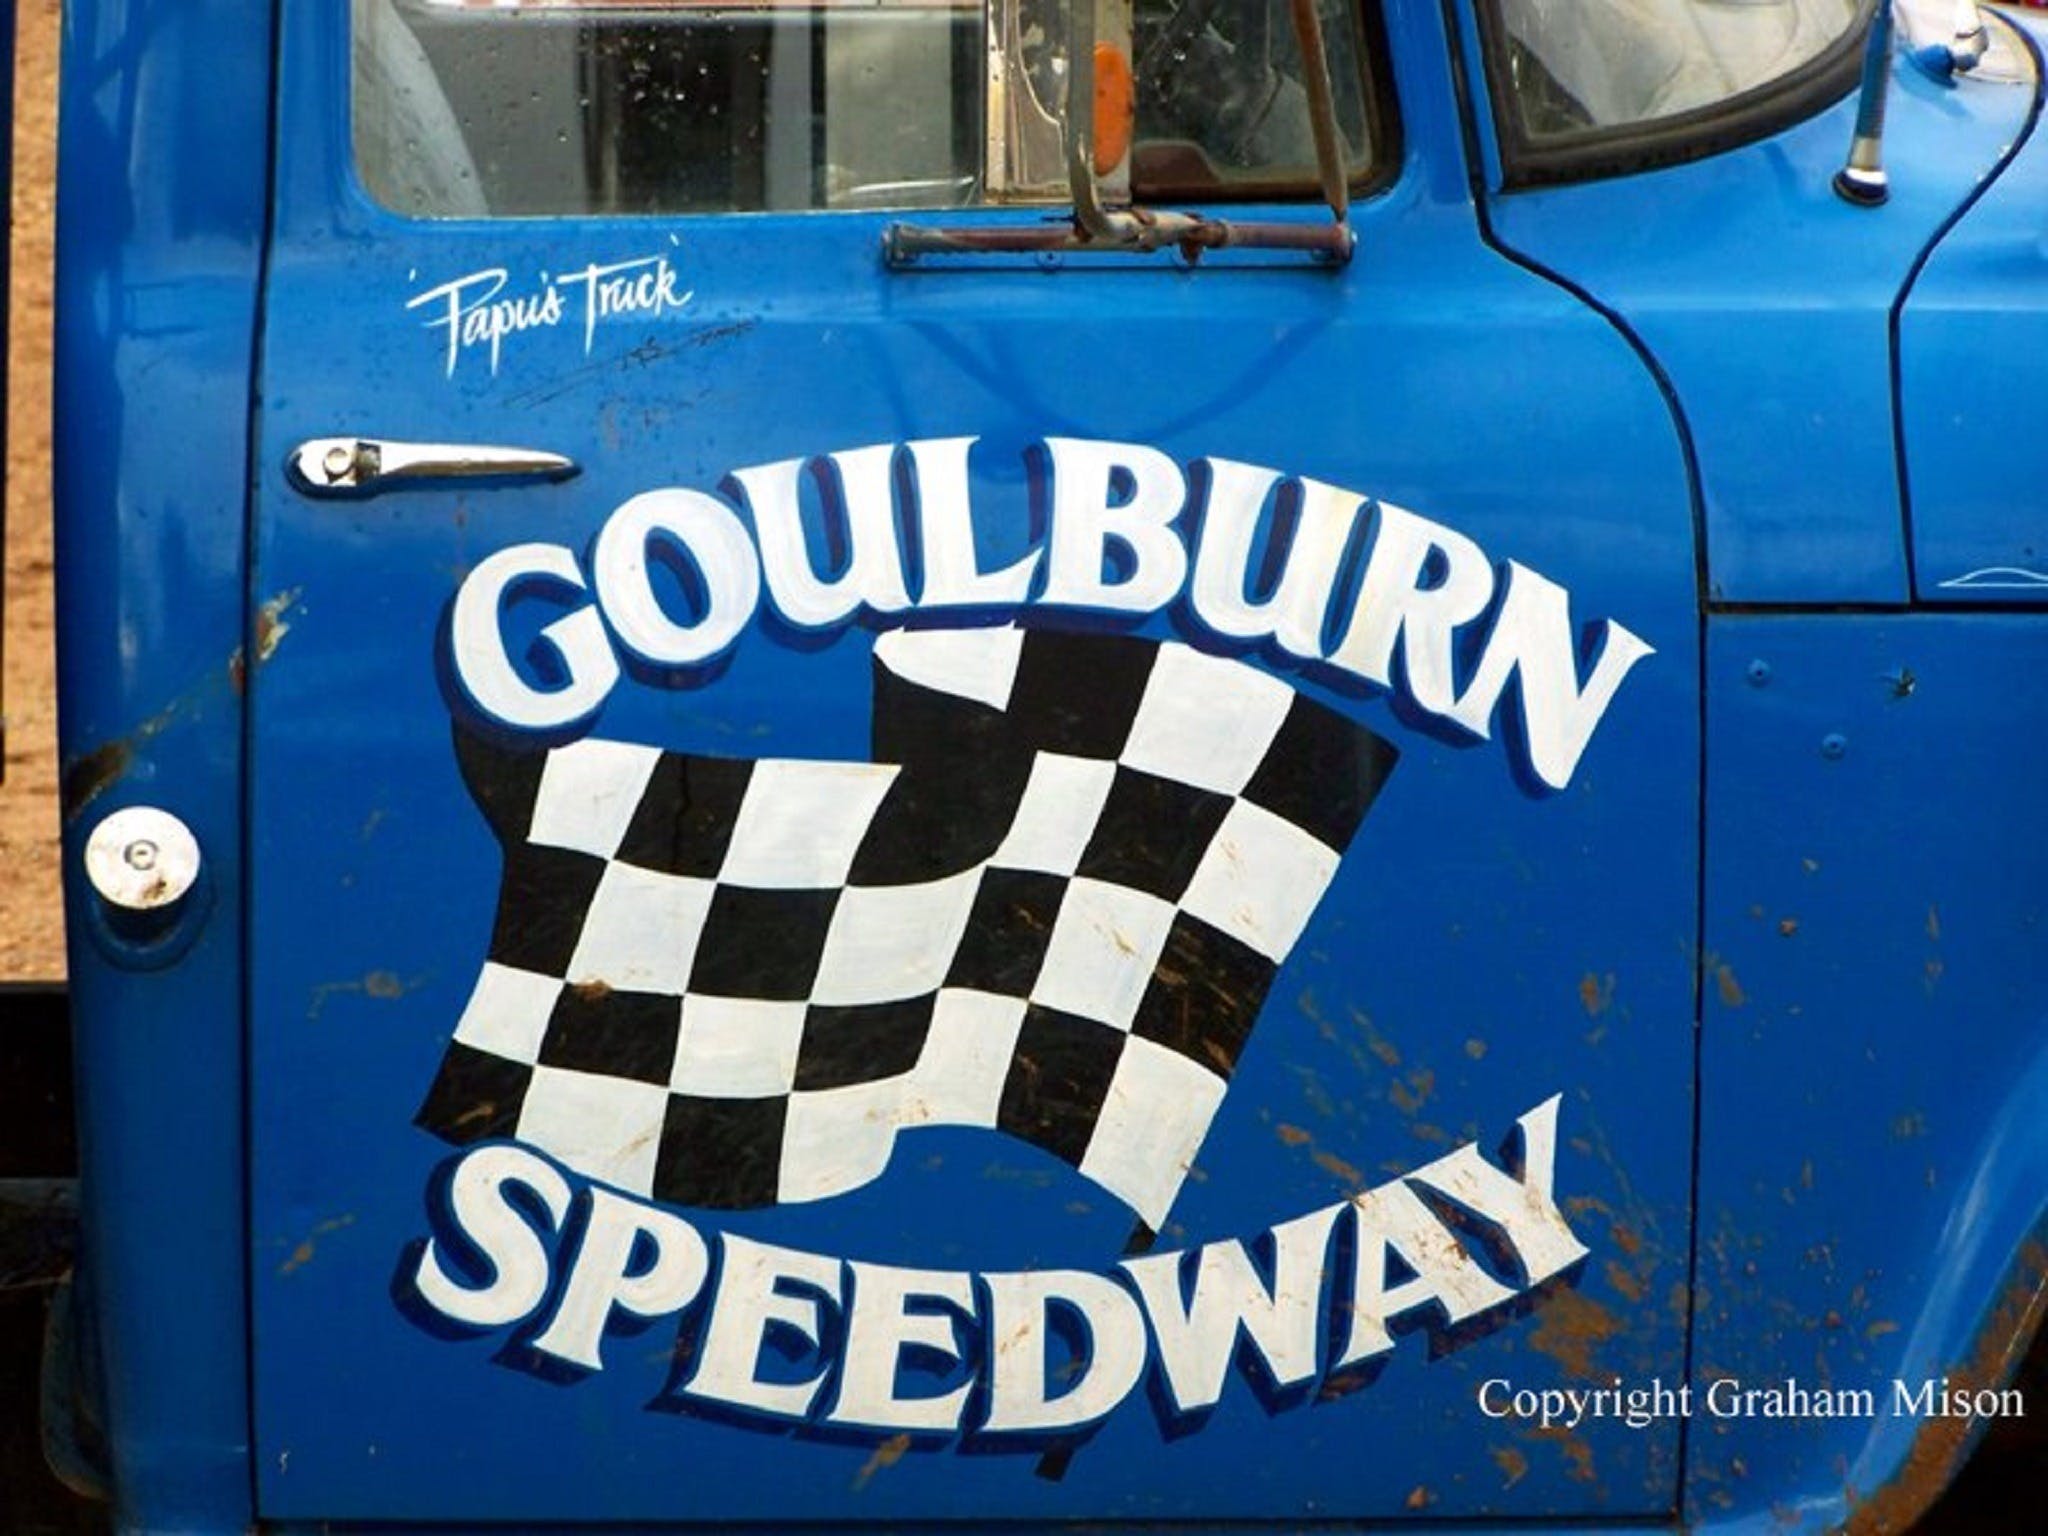 50 years of racing at Goulburn Speedway - Perisher Accommodation